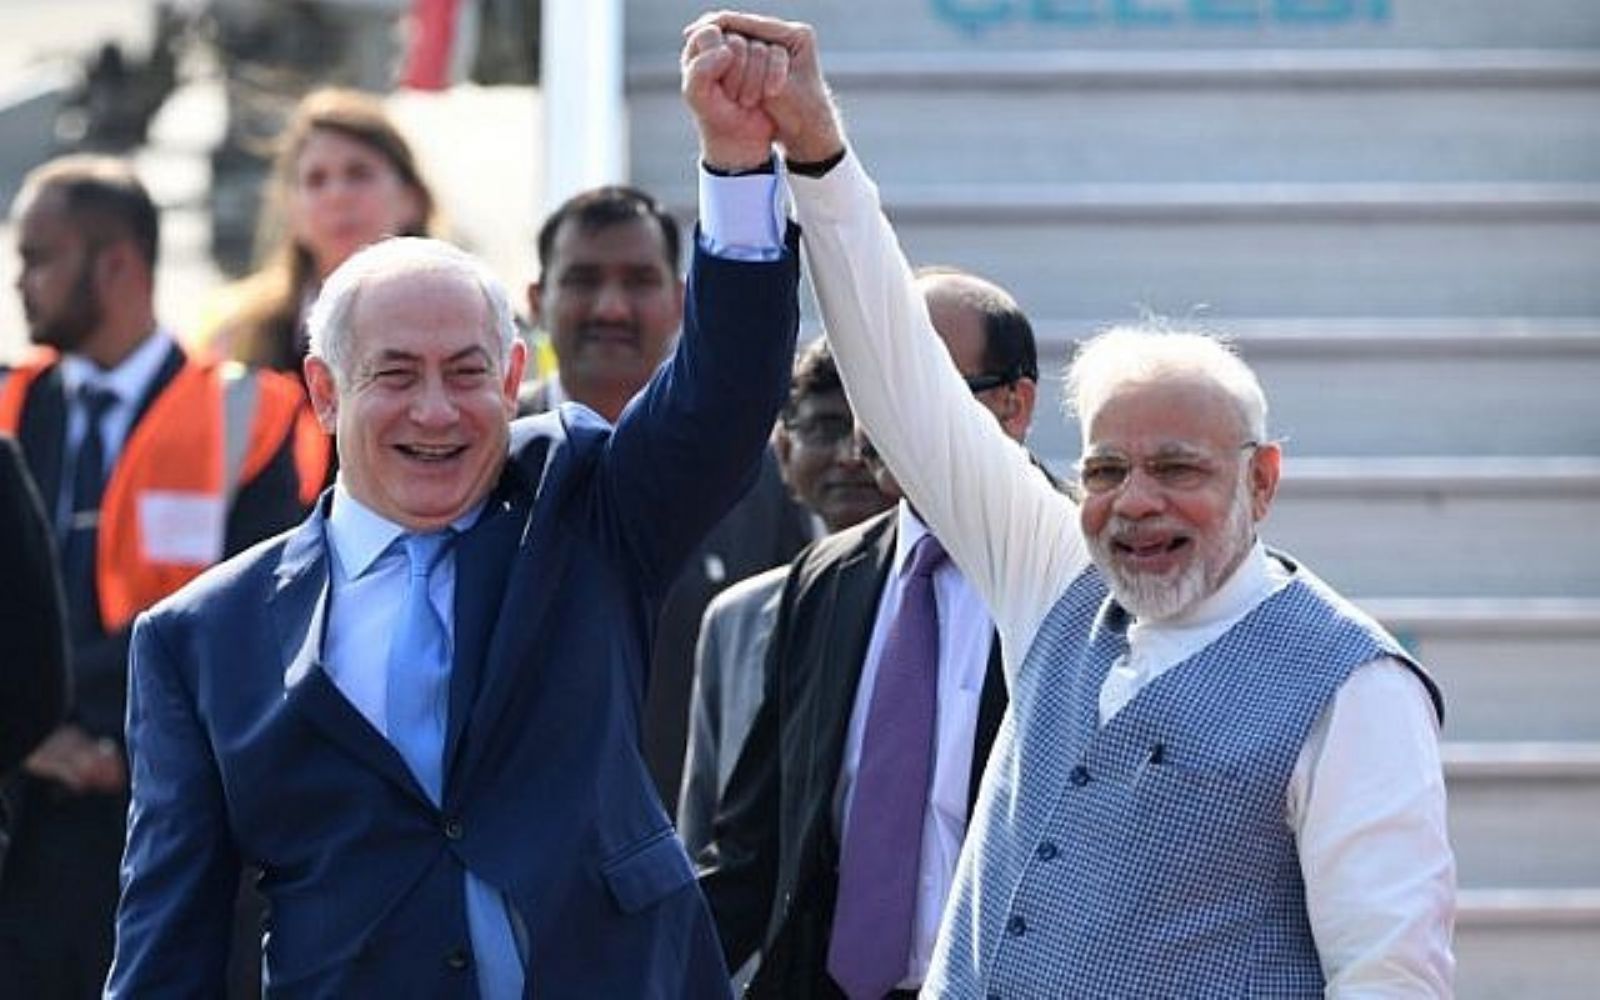 Netanyahu arrives in India, is greeted on tarmac by PM Modi